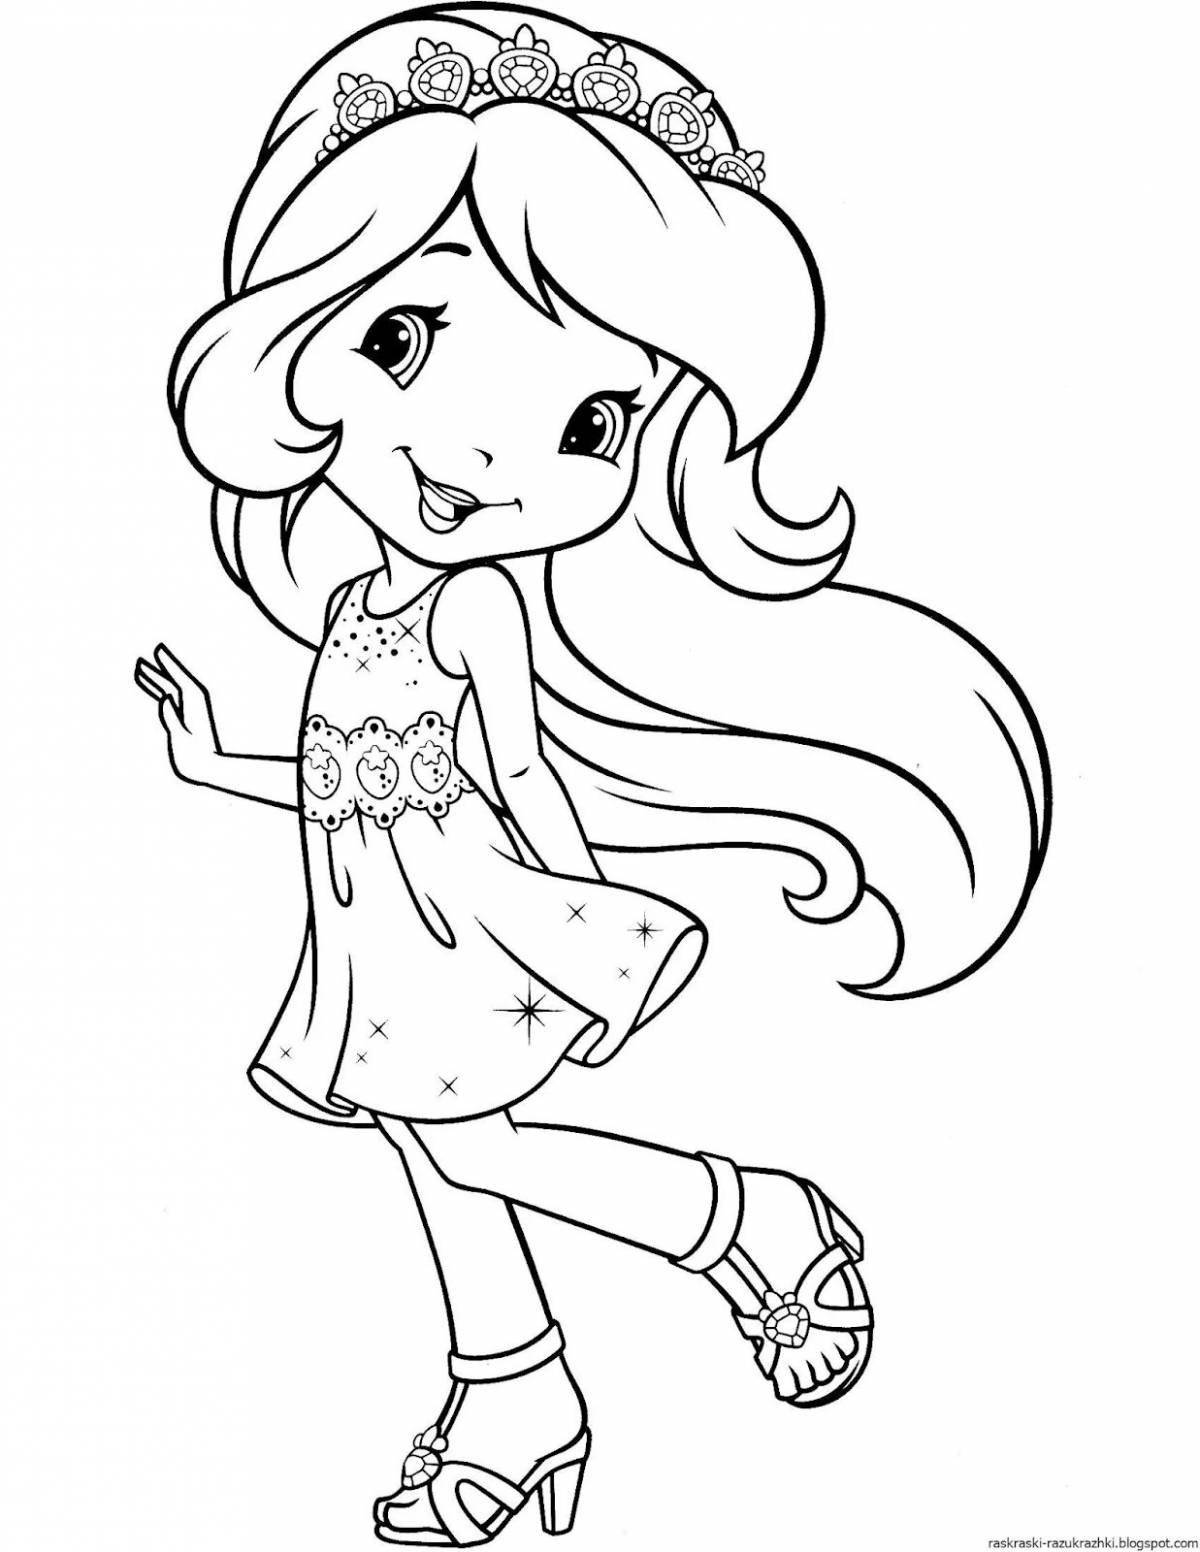 Bright coloring page 4 for girls